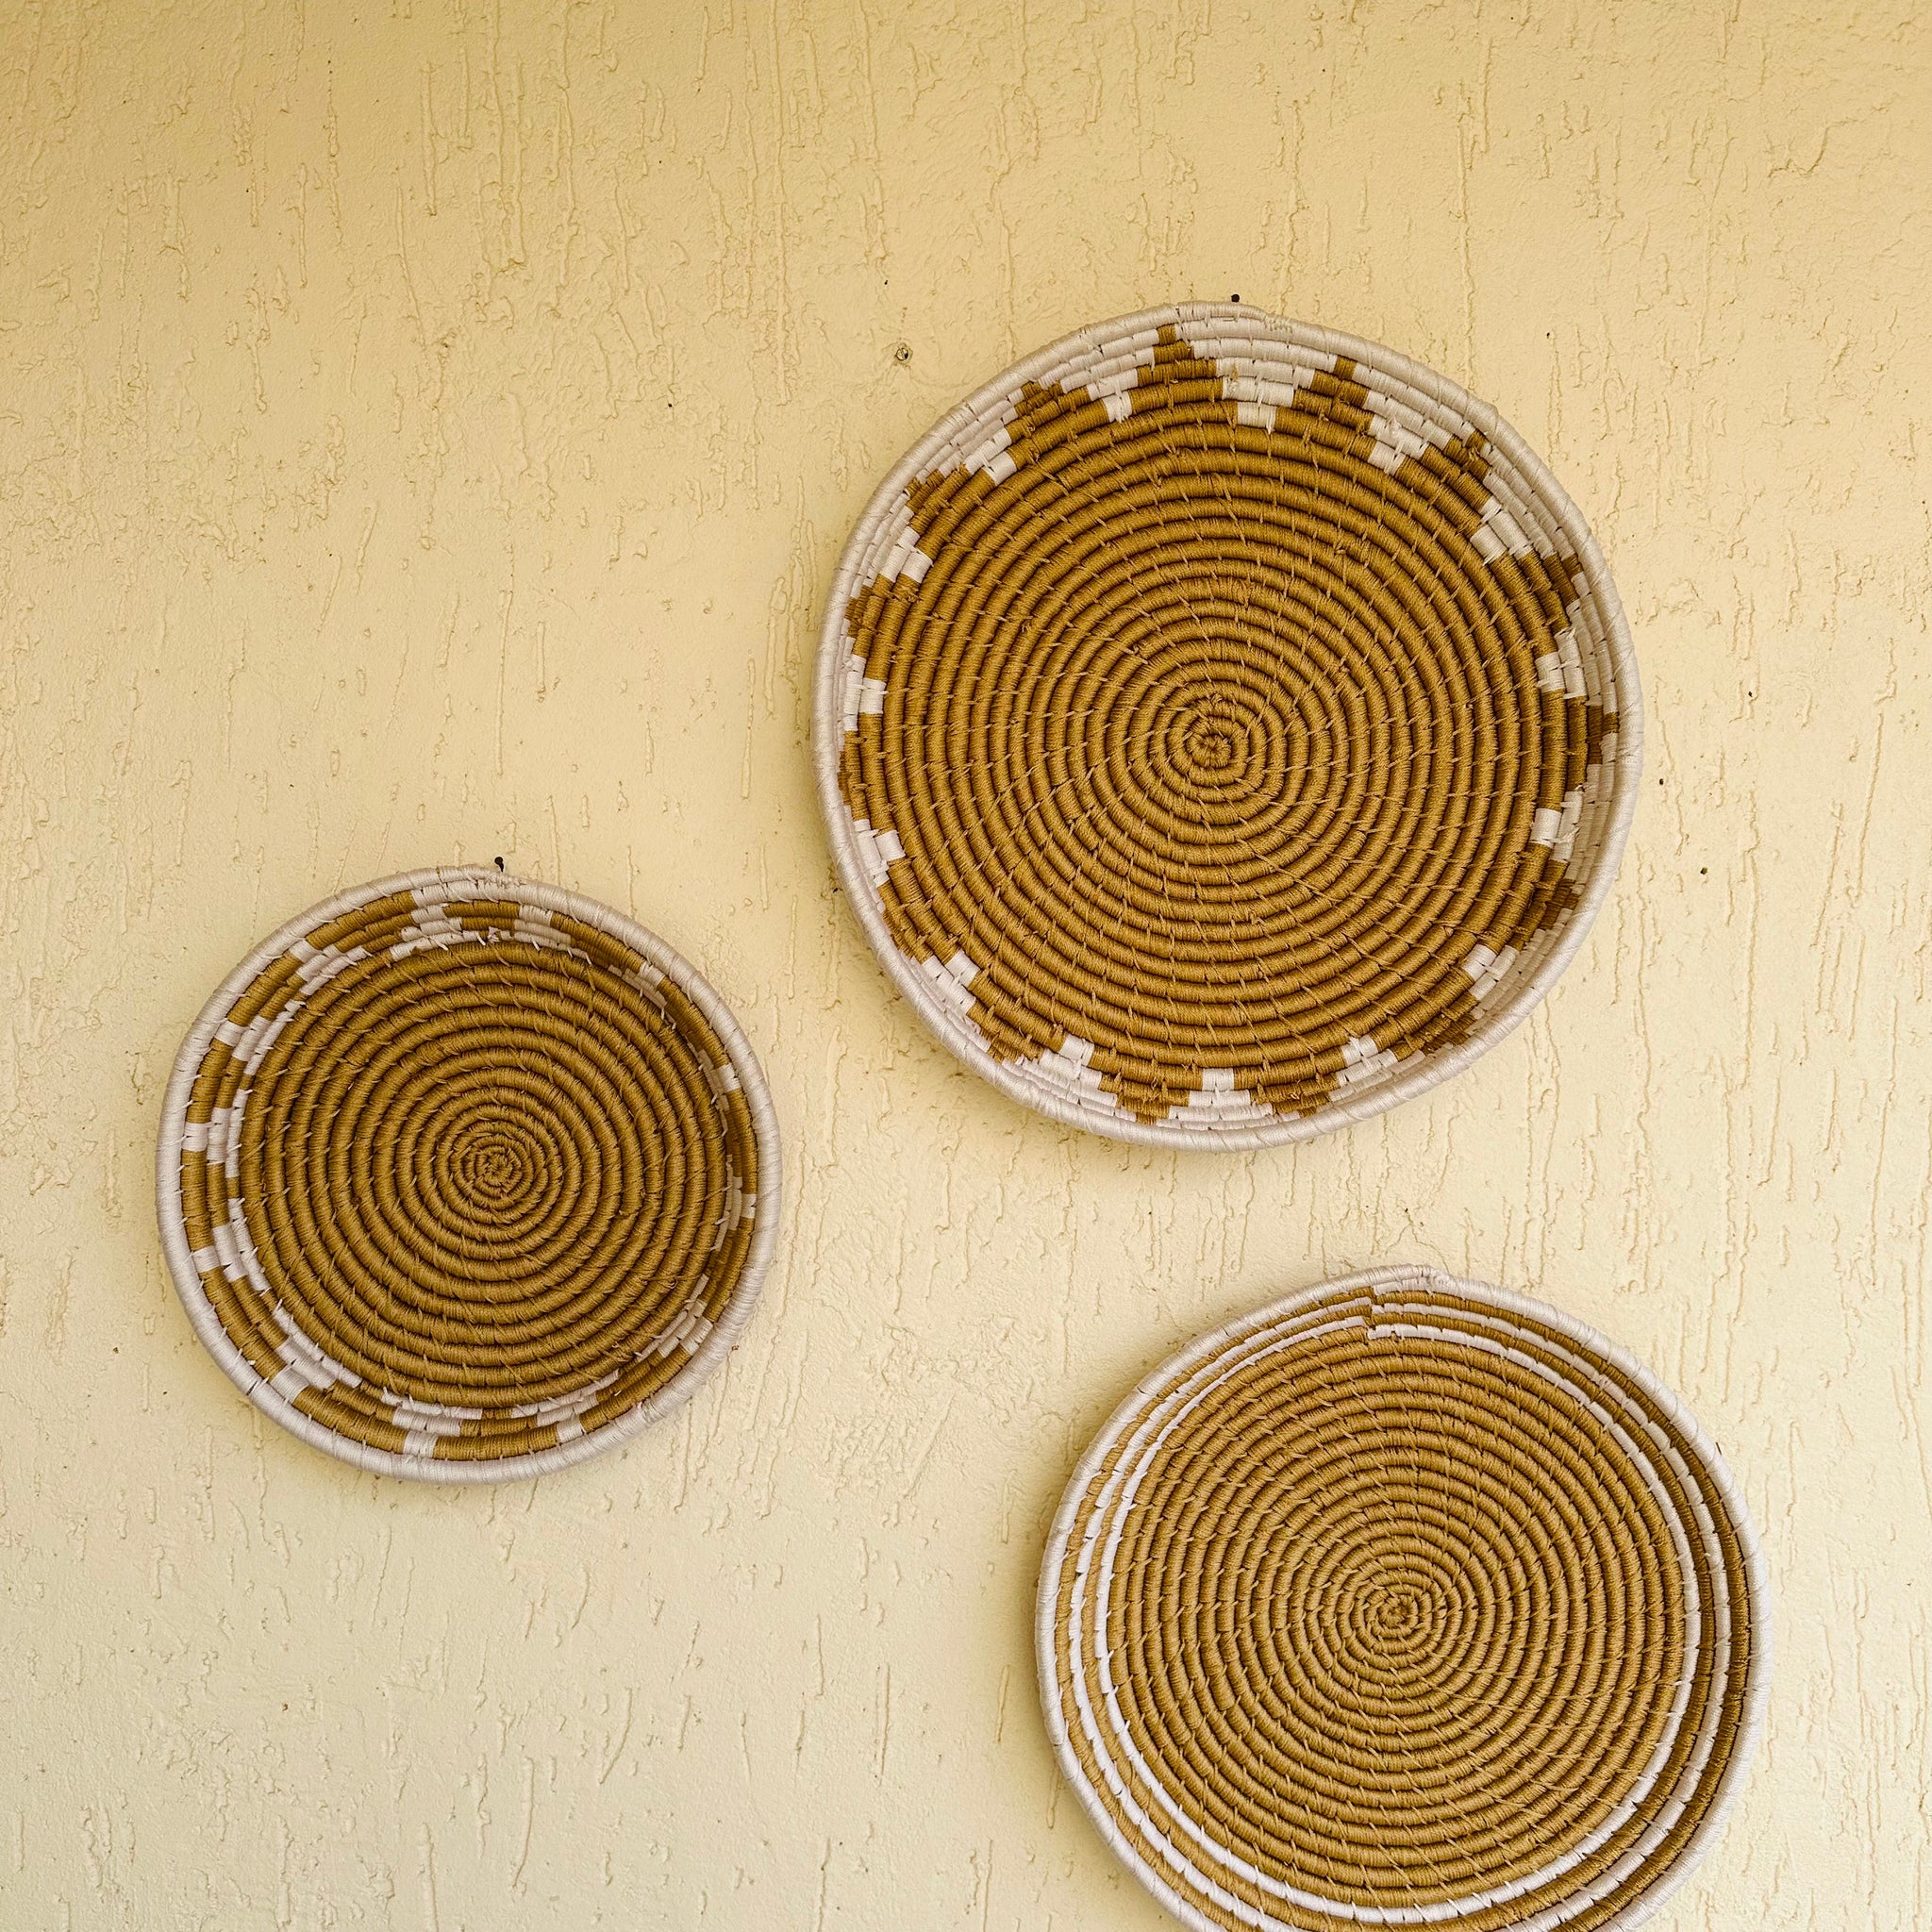 tesu Jute woven wall plates Handcrafted decor Abstract designs Eco-friendly materials Sustainable living Bohemian decor Modern chic Interior decor trends Artisan craftsmanship Versatile wall decor Organic charm Sustainable home decor Timeless pieces Artistry Sophistication tesu